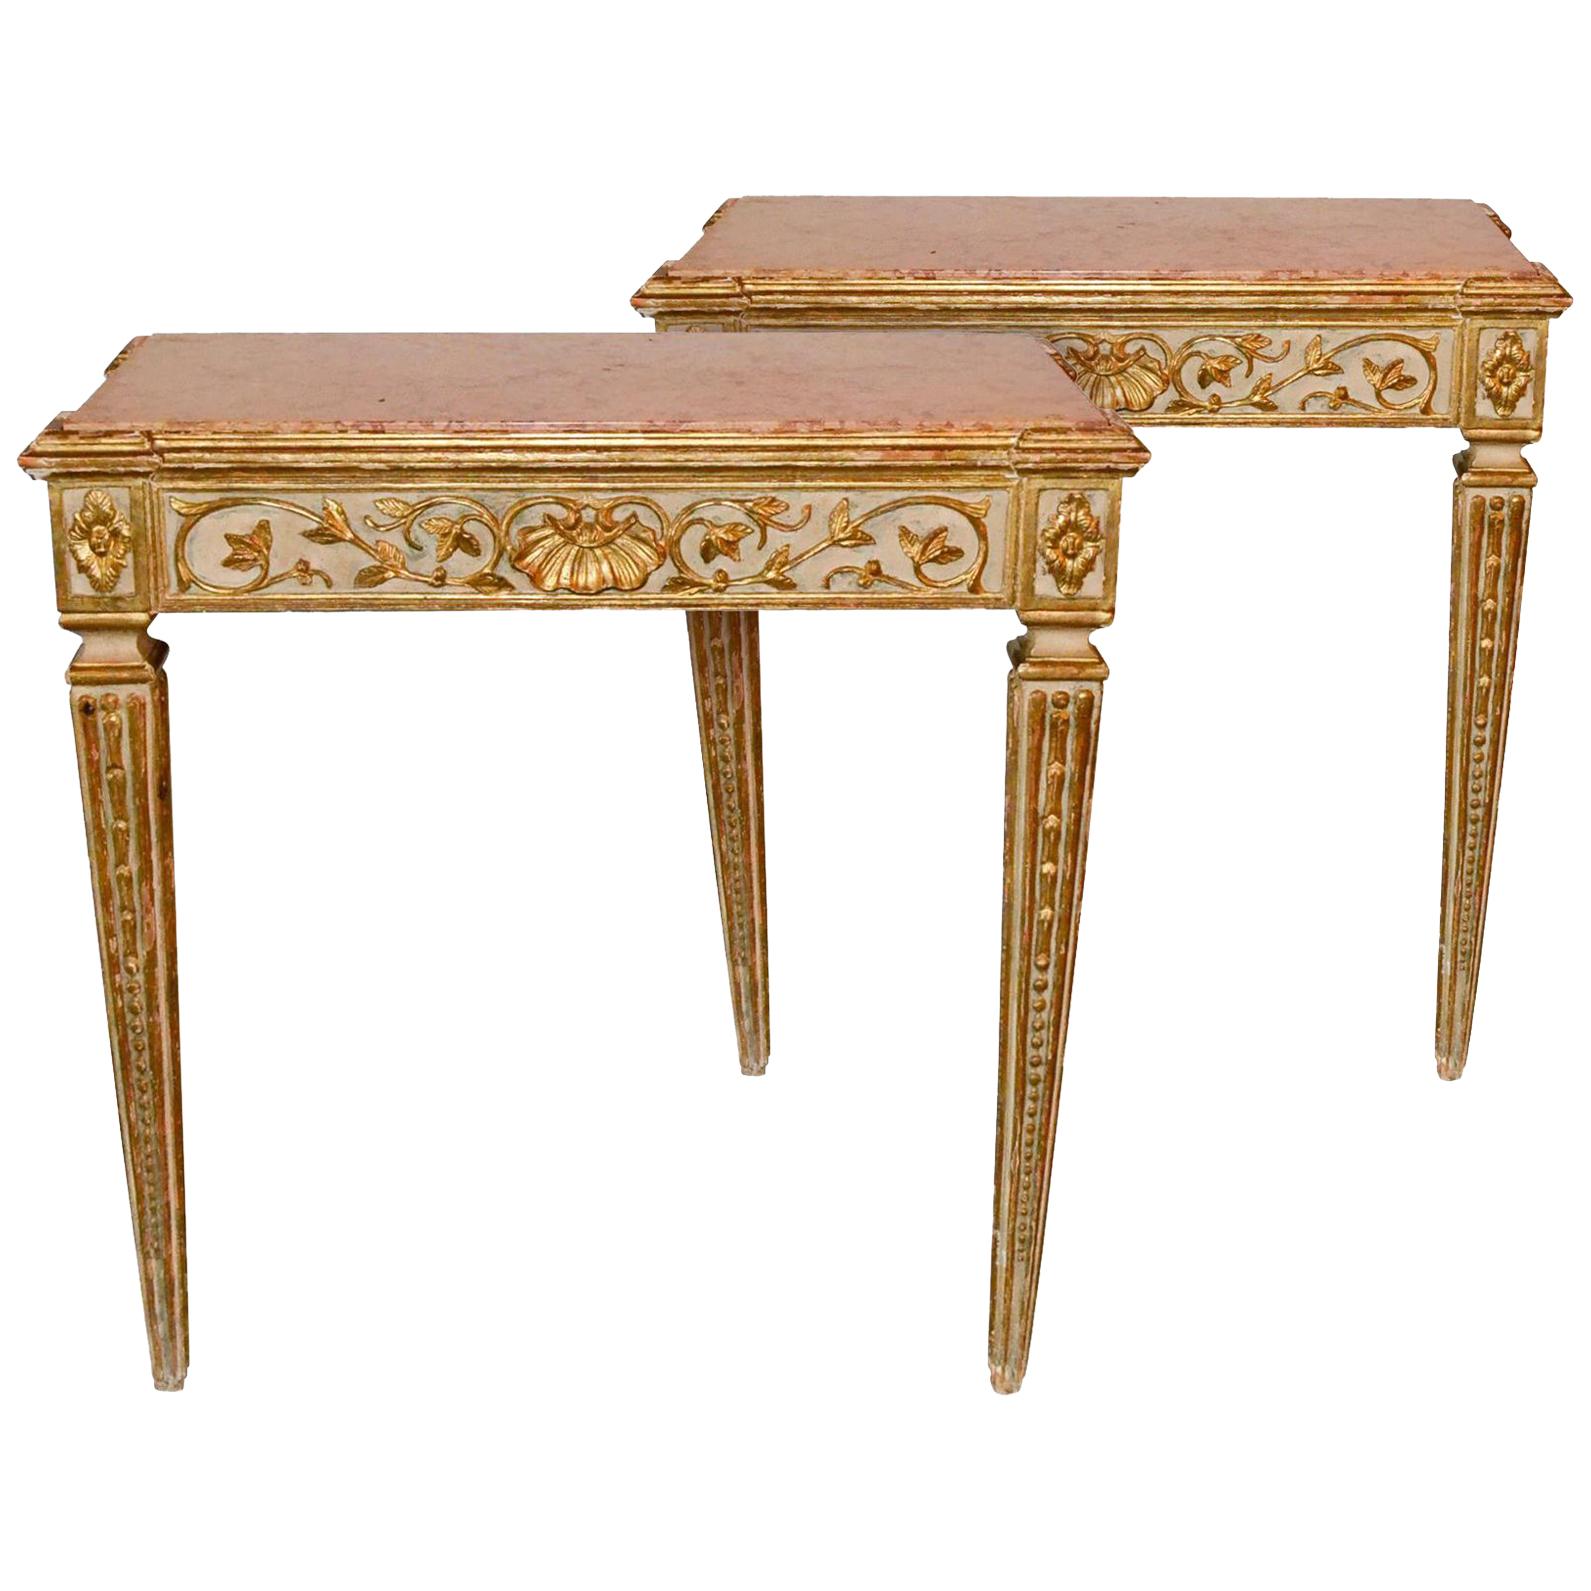 19th Century French Neoclassical Consoles